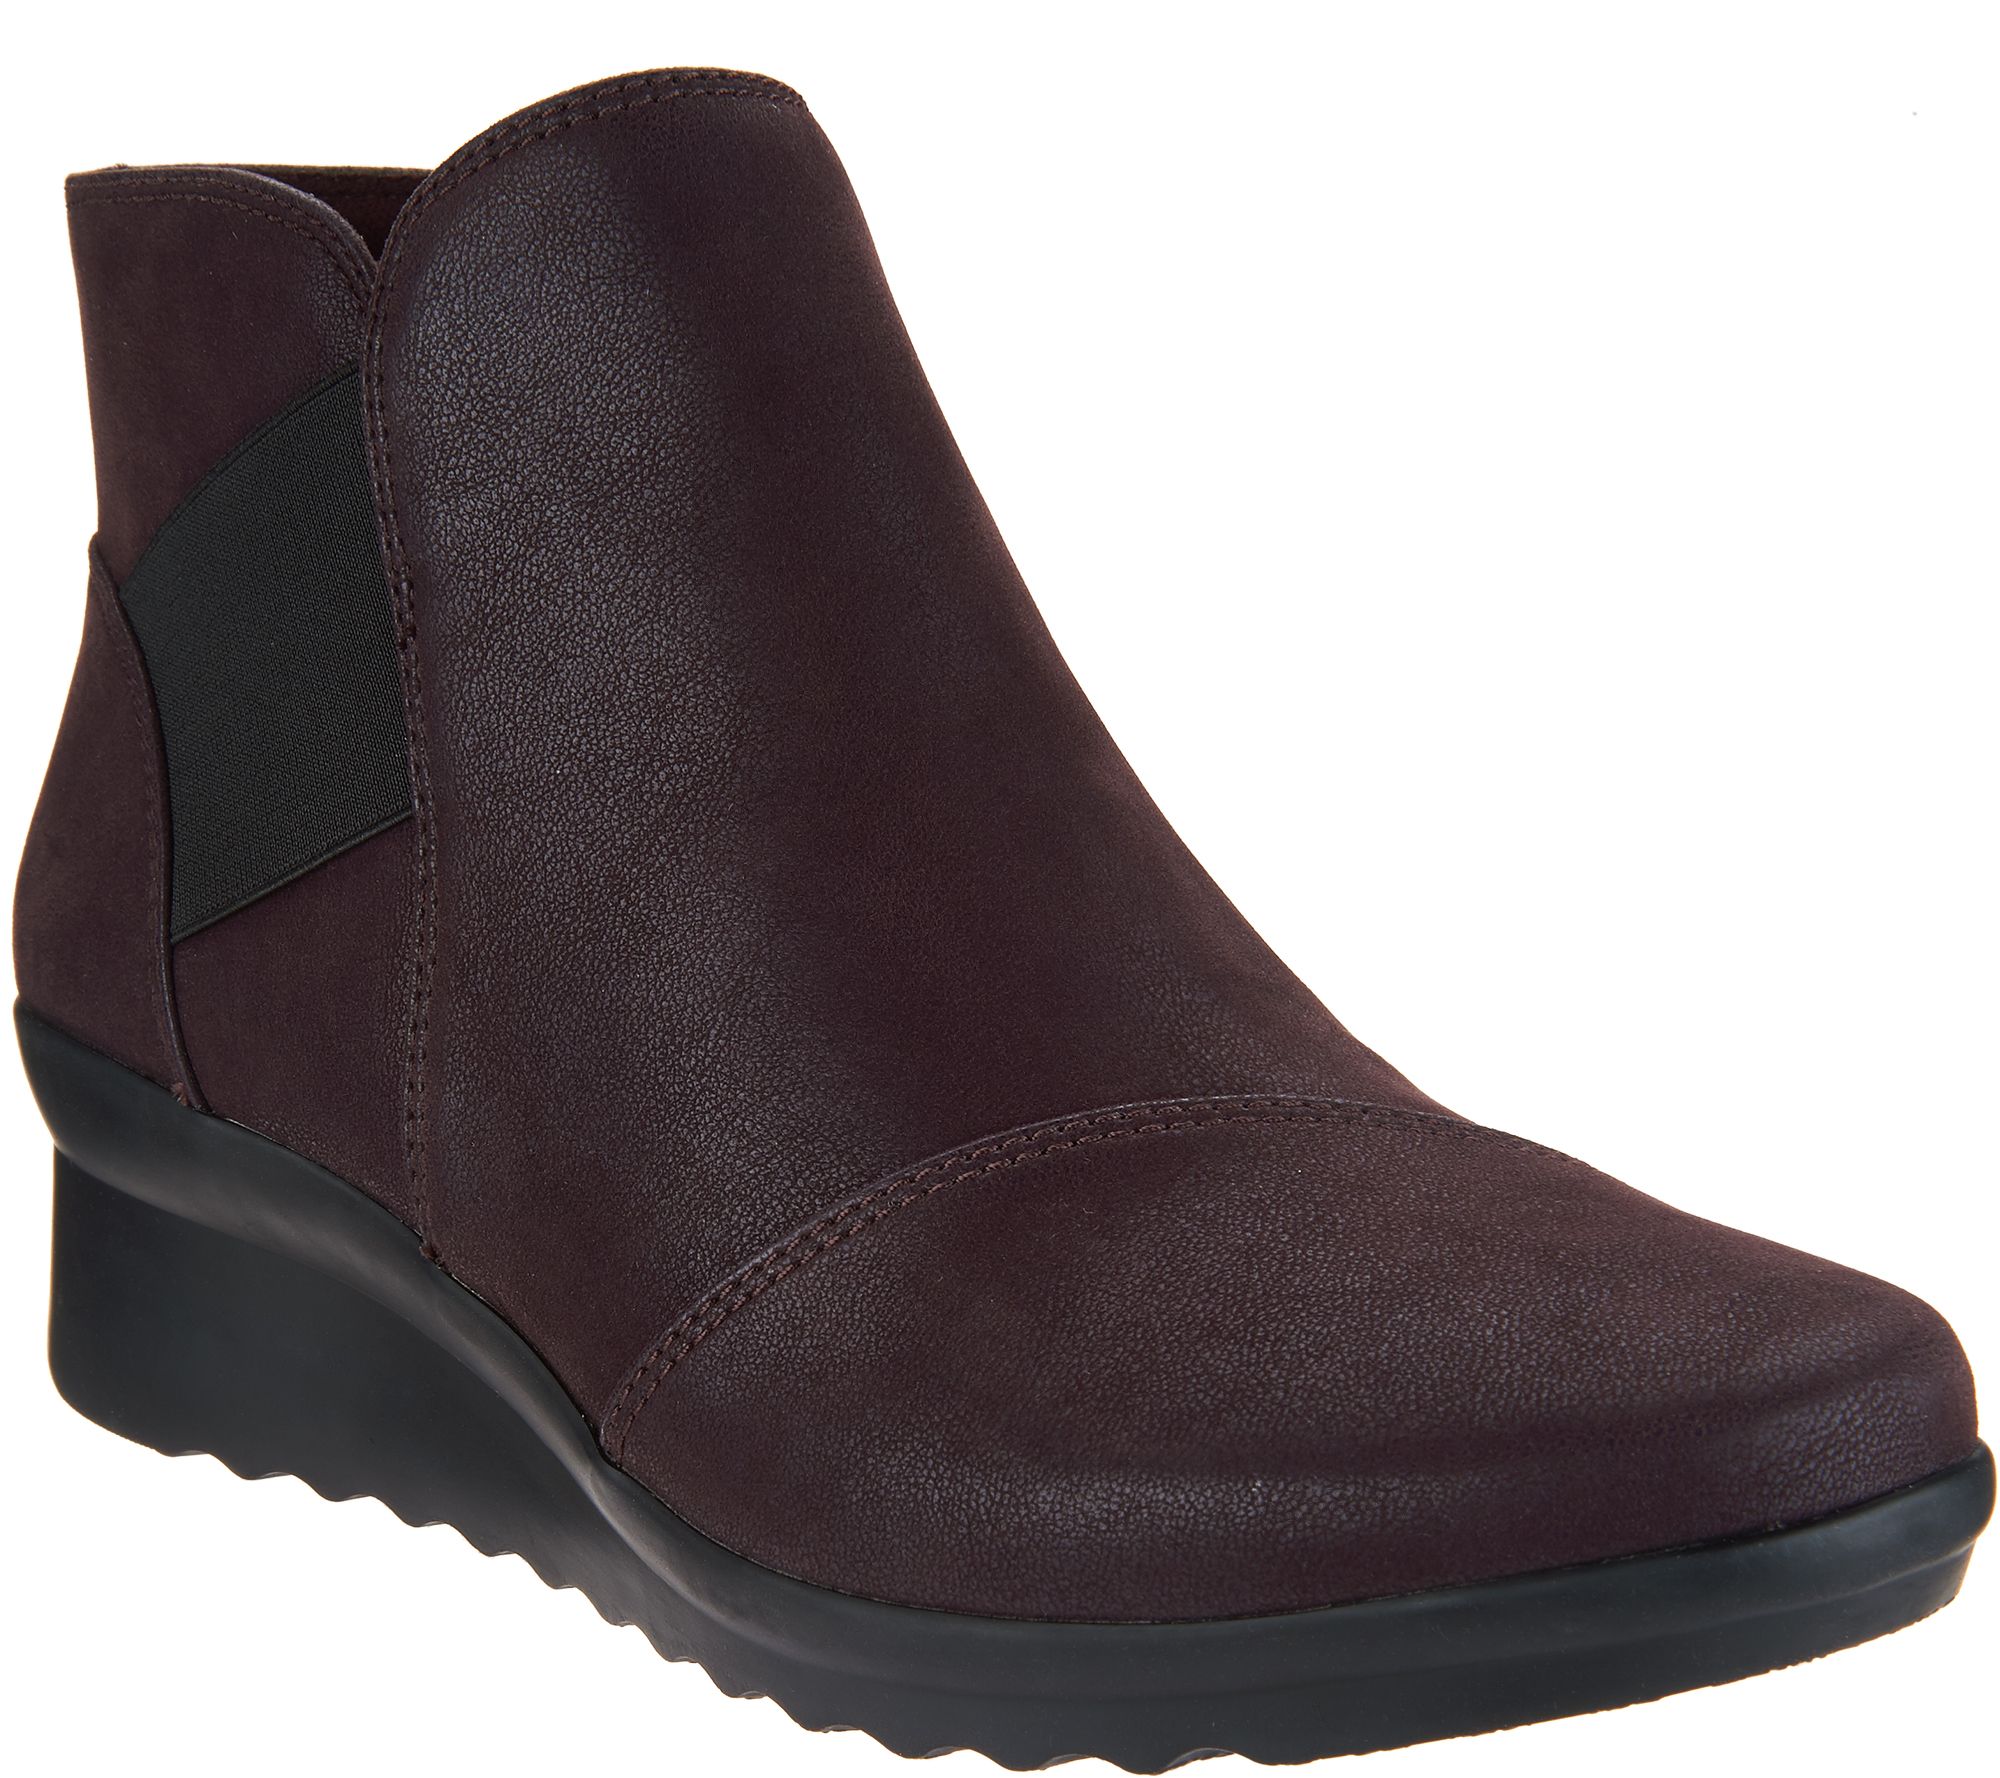 CLOUDSTEPPERS by Clarks Wedge Ankle 